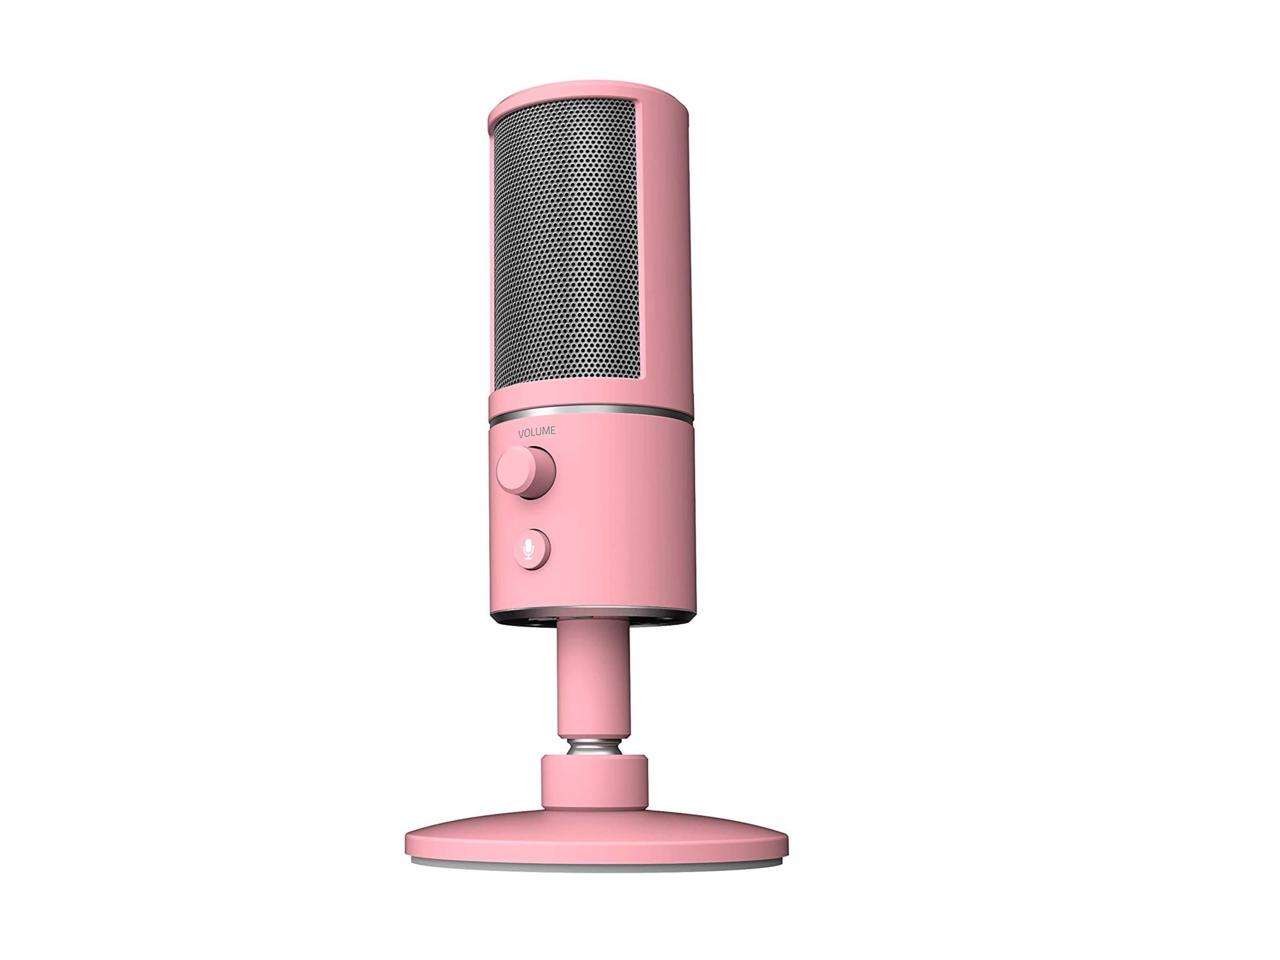 The Razer Seiren X USB streaming microphone is pretty in pink and on sale for $20 off.